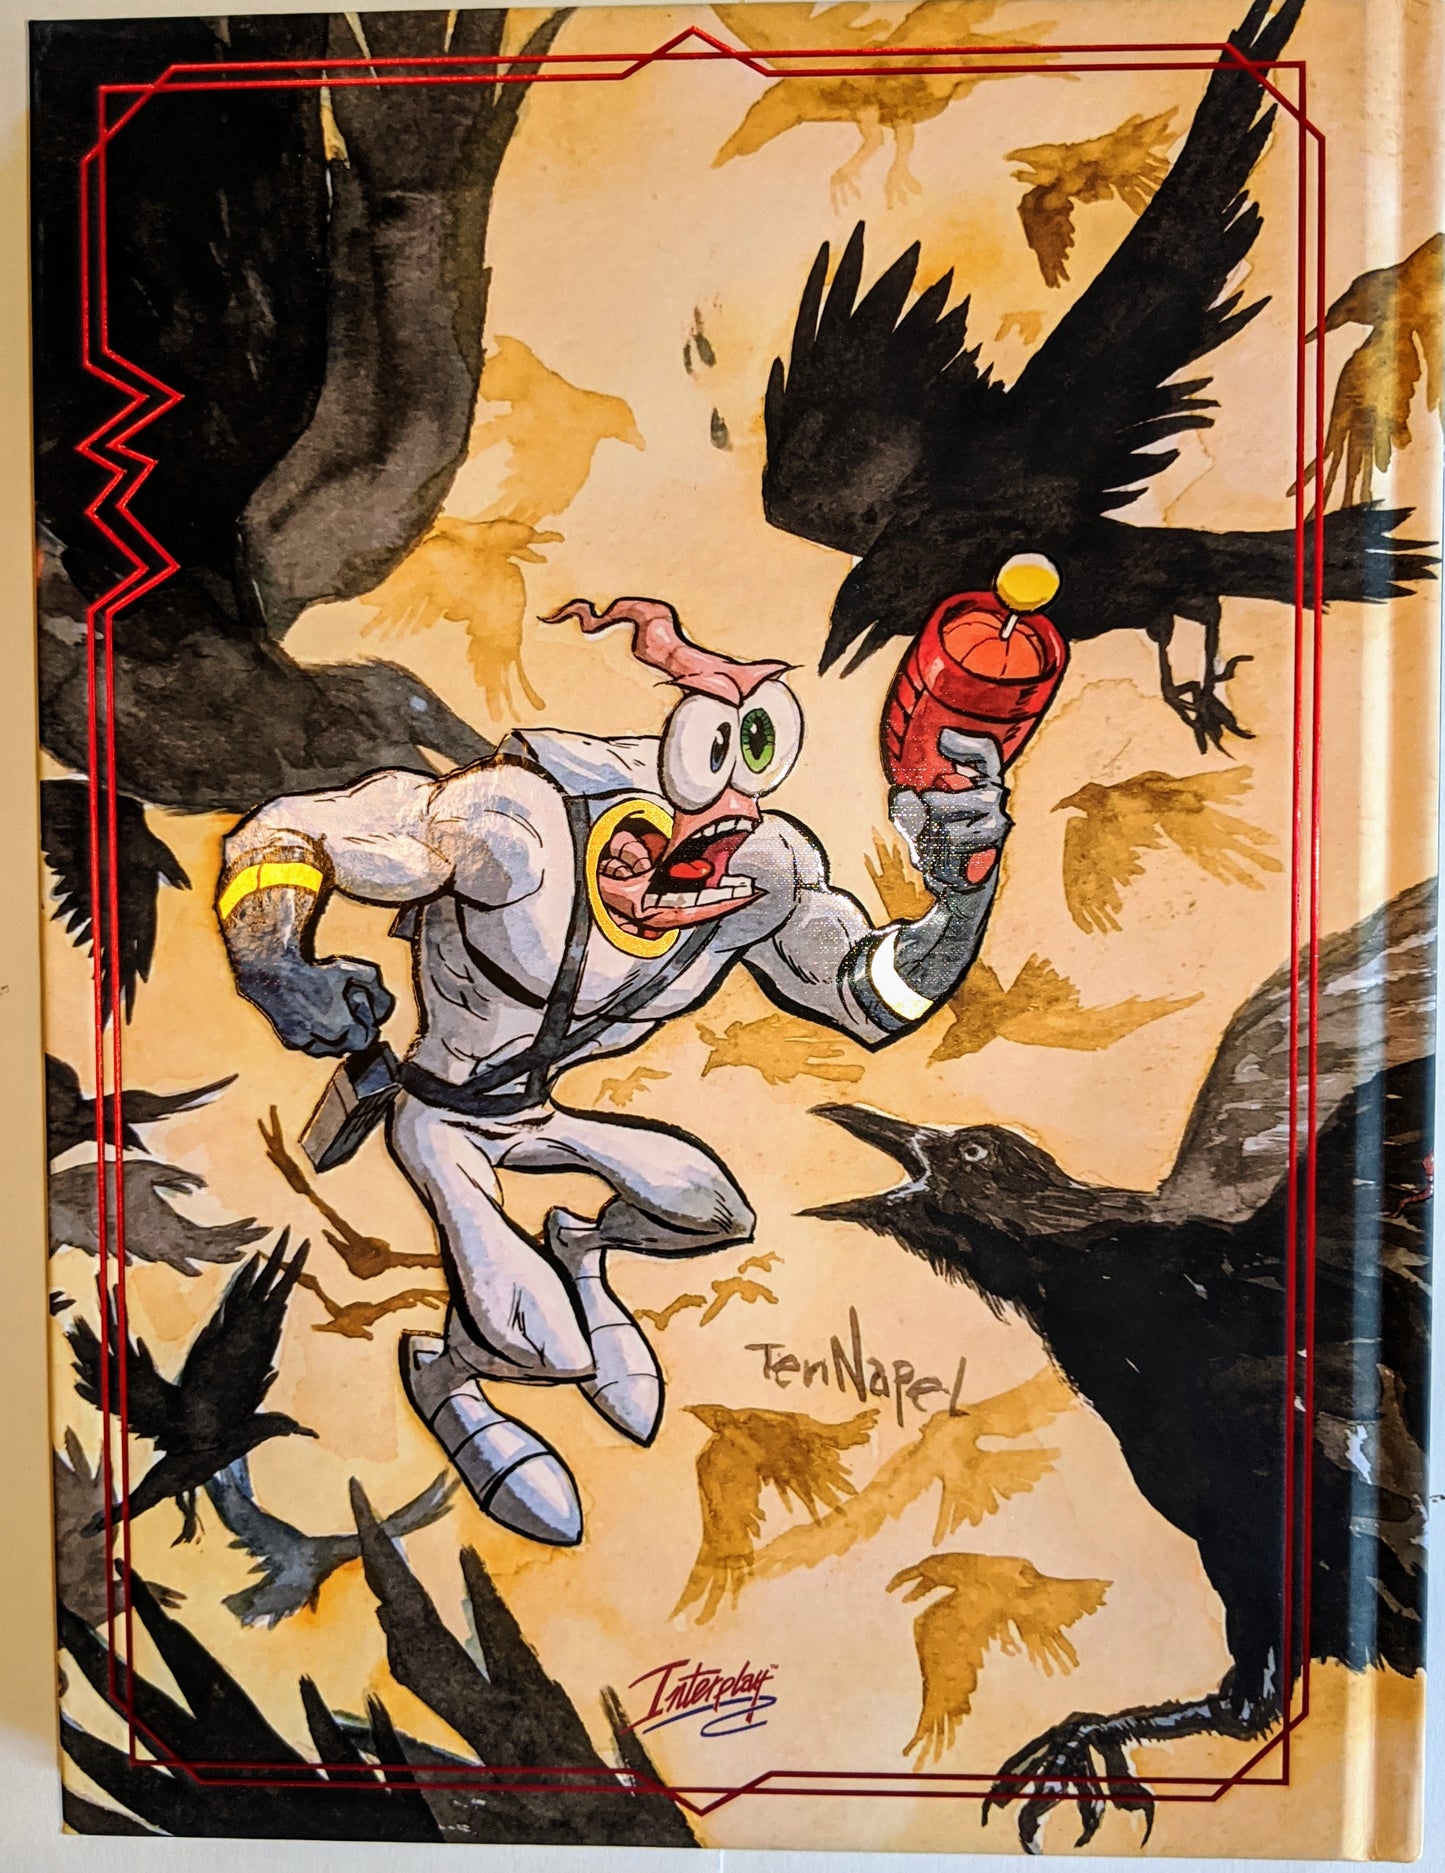 Earthworm Jim: Launch the Cow